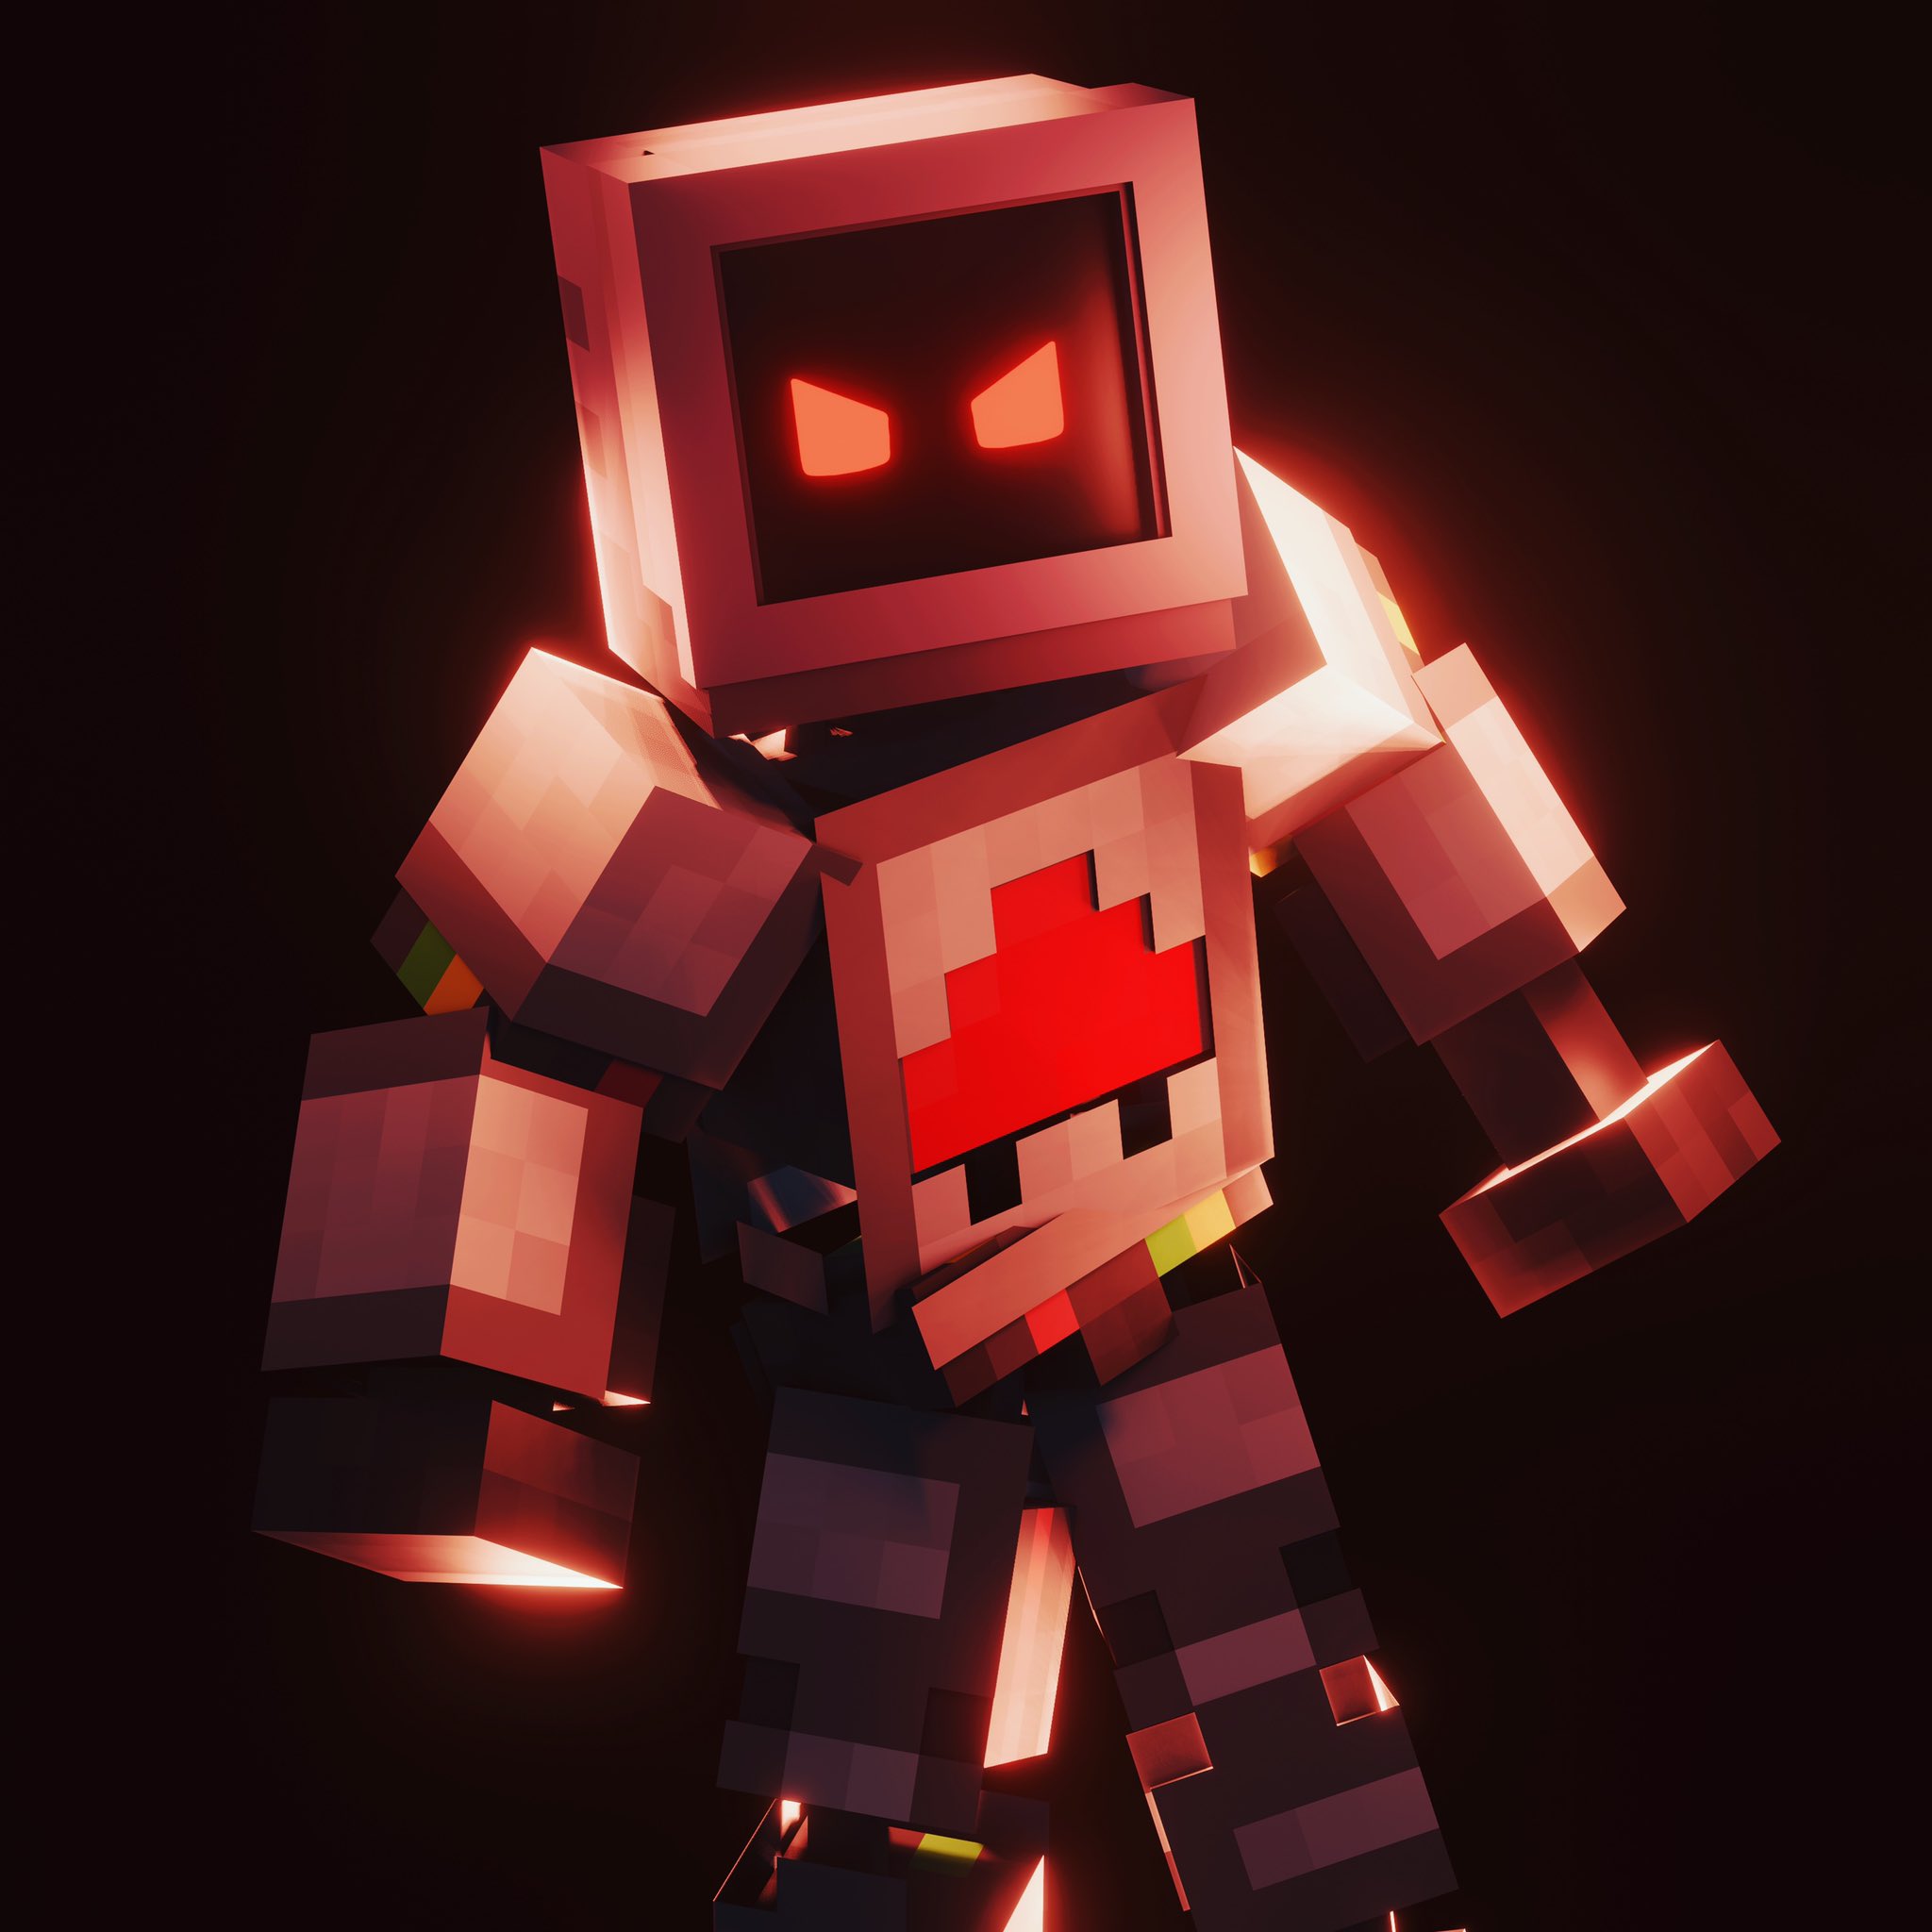 SyncedUp on Twitter: "Made a brand new OC with the robot skin I made 2 ago for my account “PostSynced” Found this rig today by @NavillusStudio and just had to